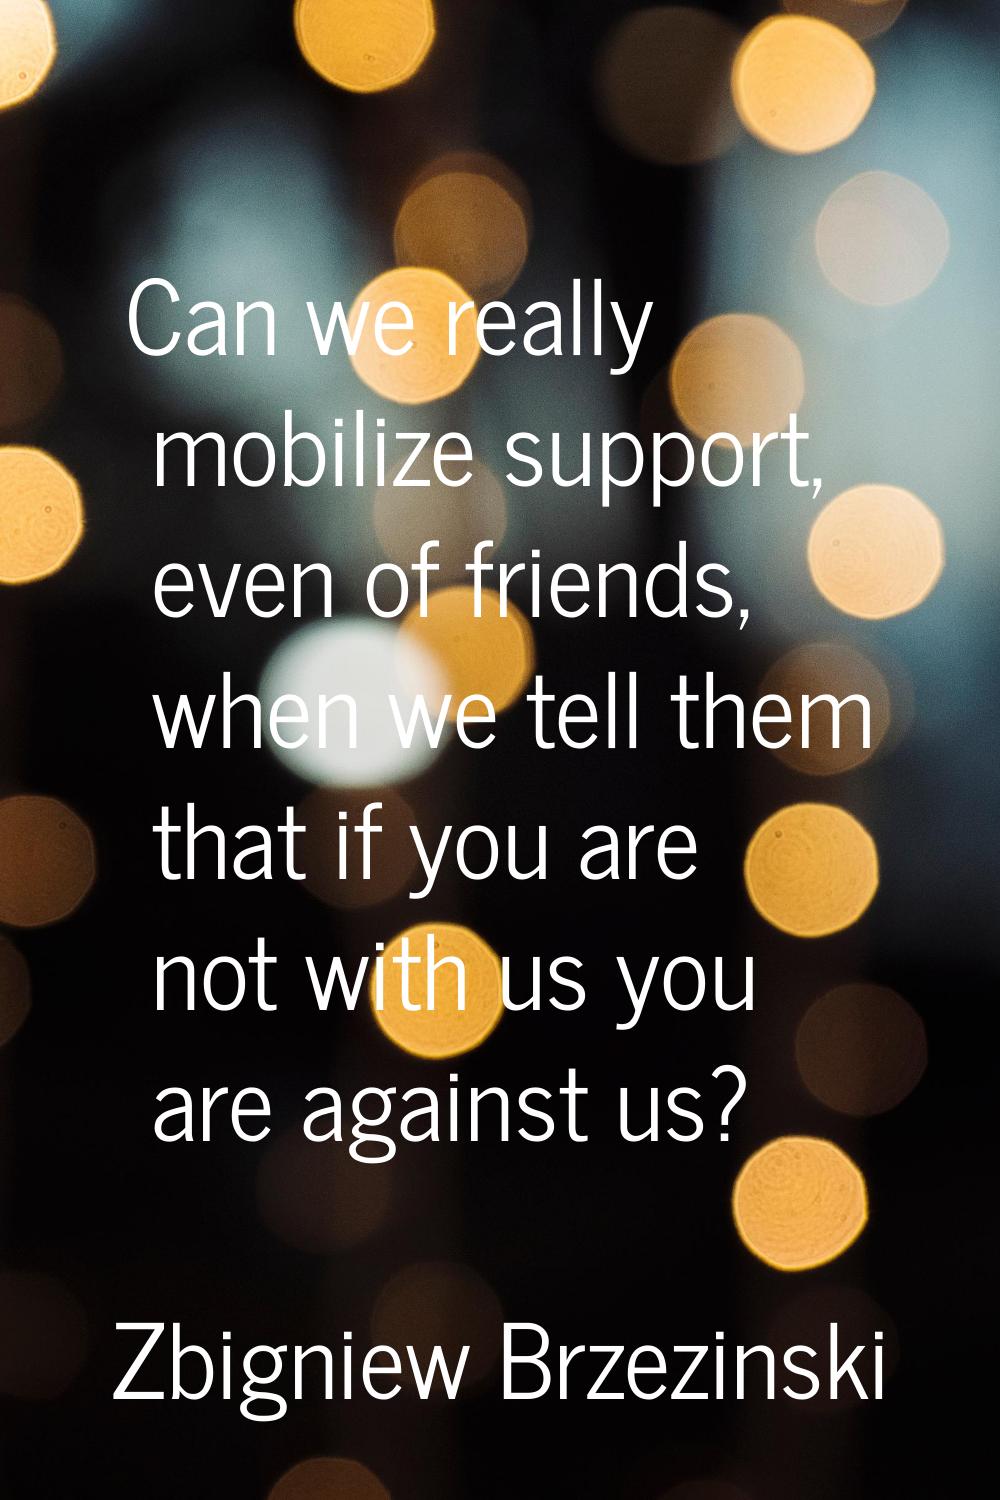 Can we really mobilize support, even of friends, when we tell them that if you are not with us you 